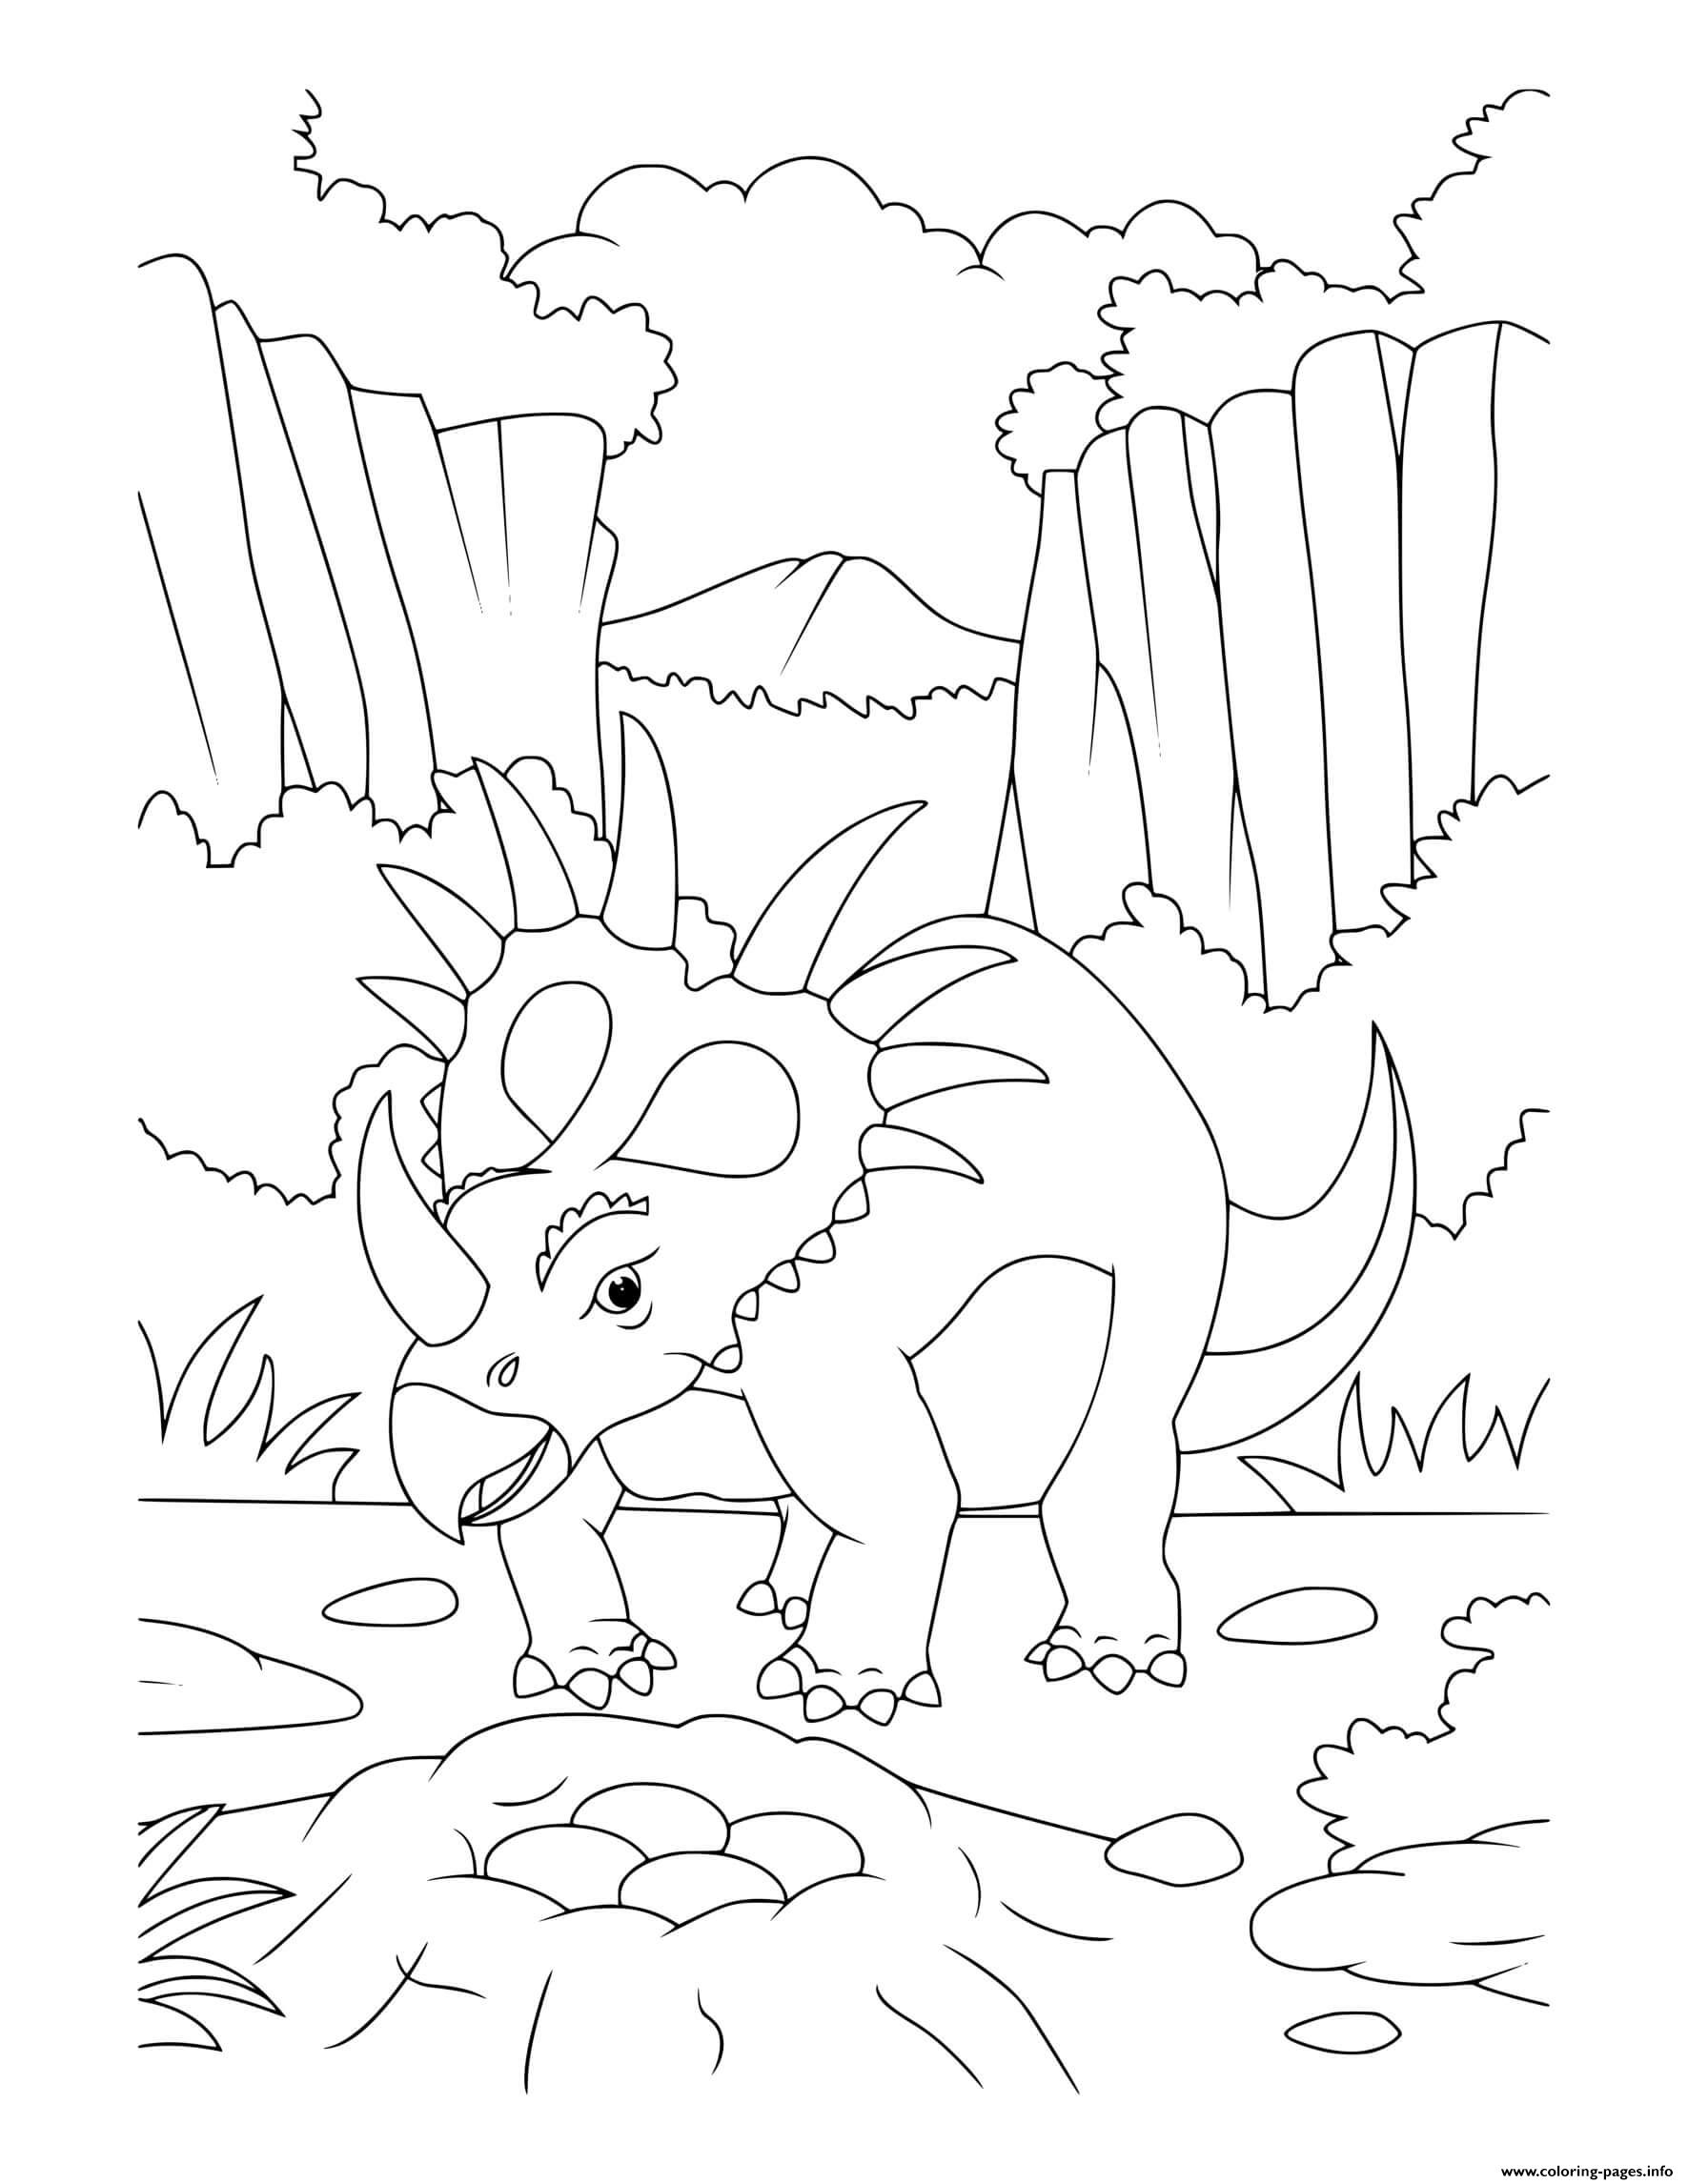 Download Dinosaur Styracosaurus With Eggs Coloring Pages Printable